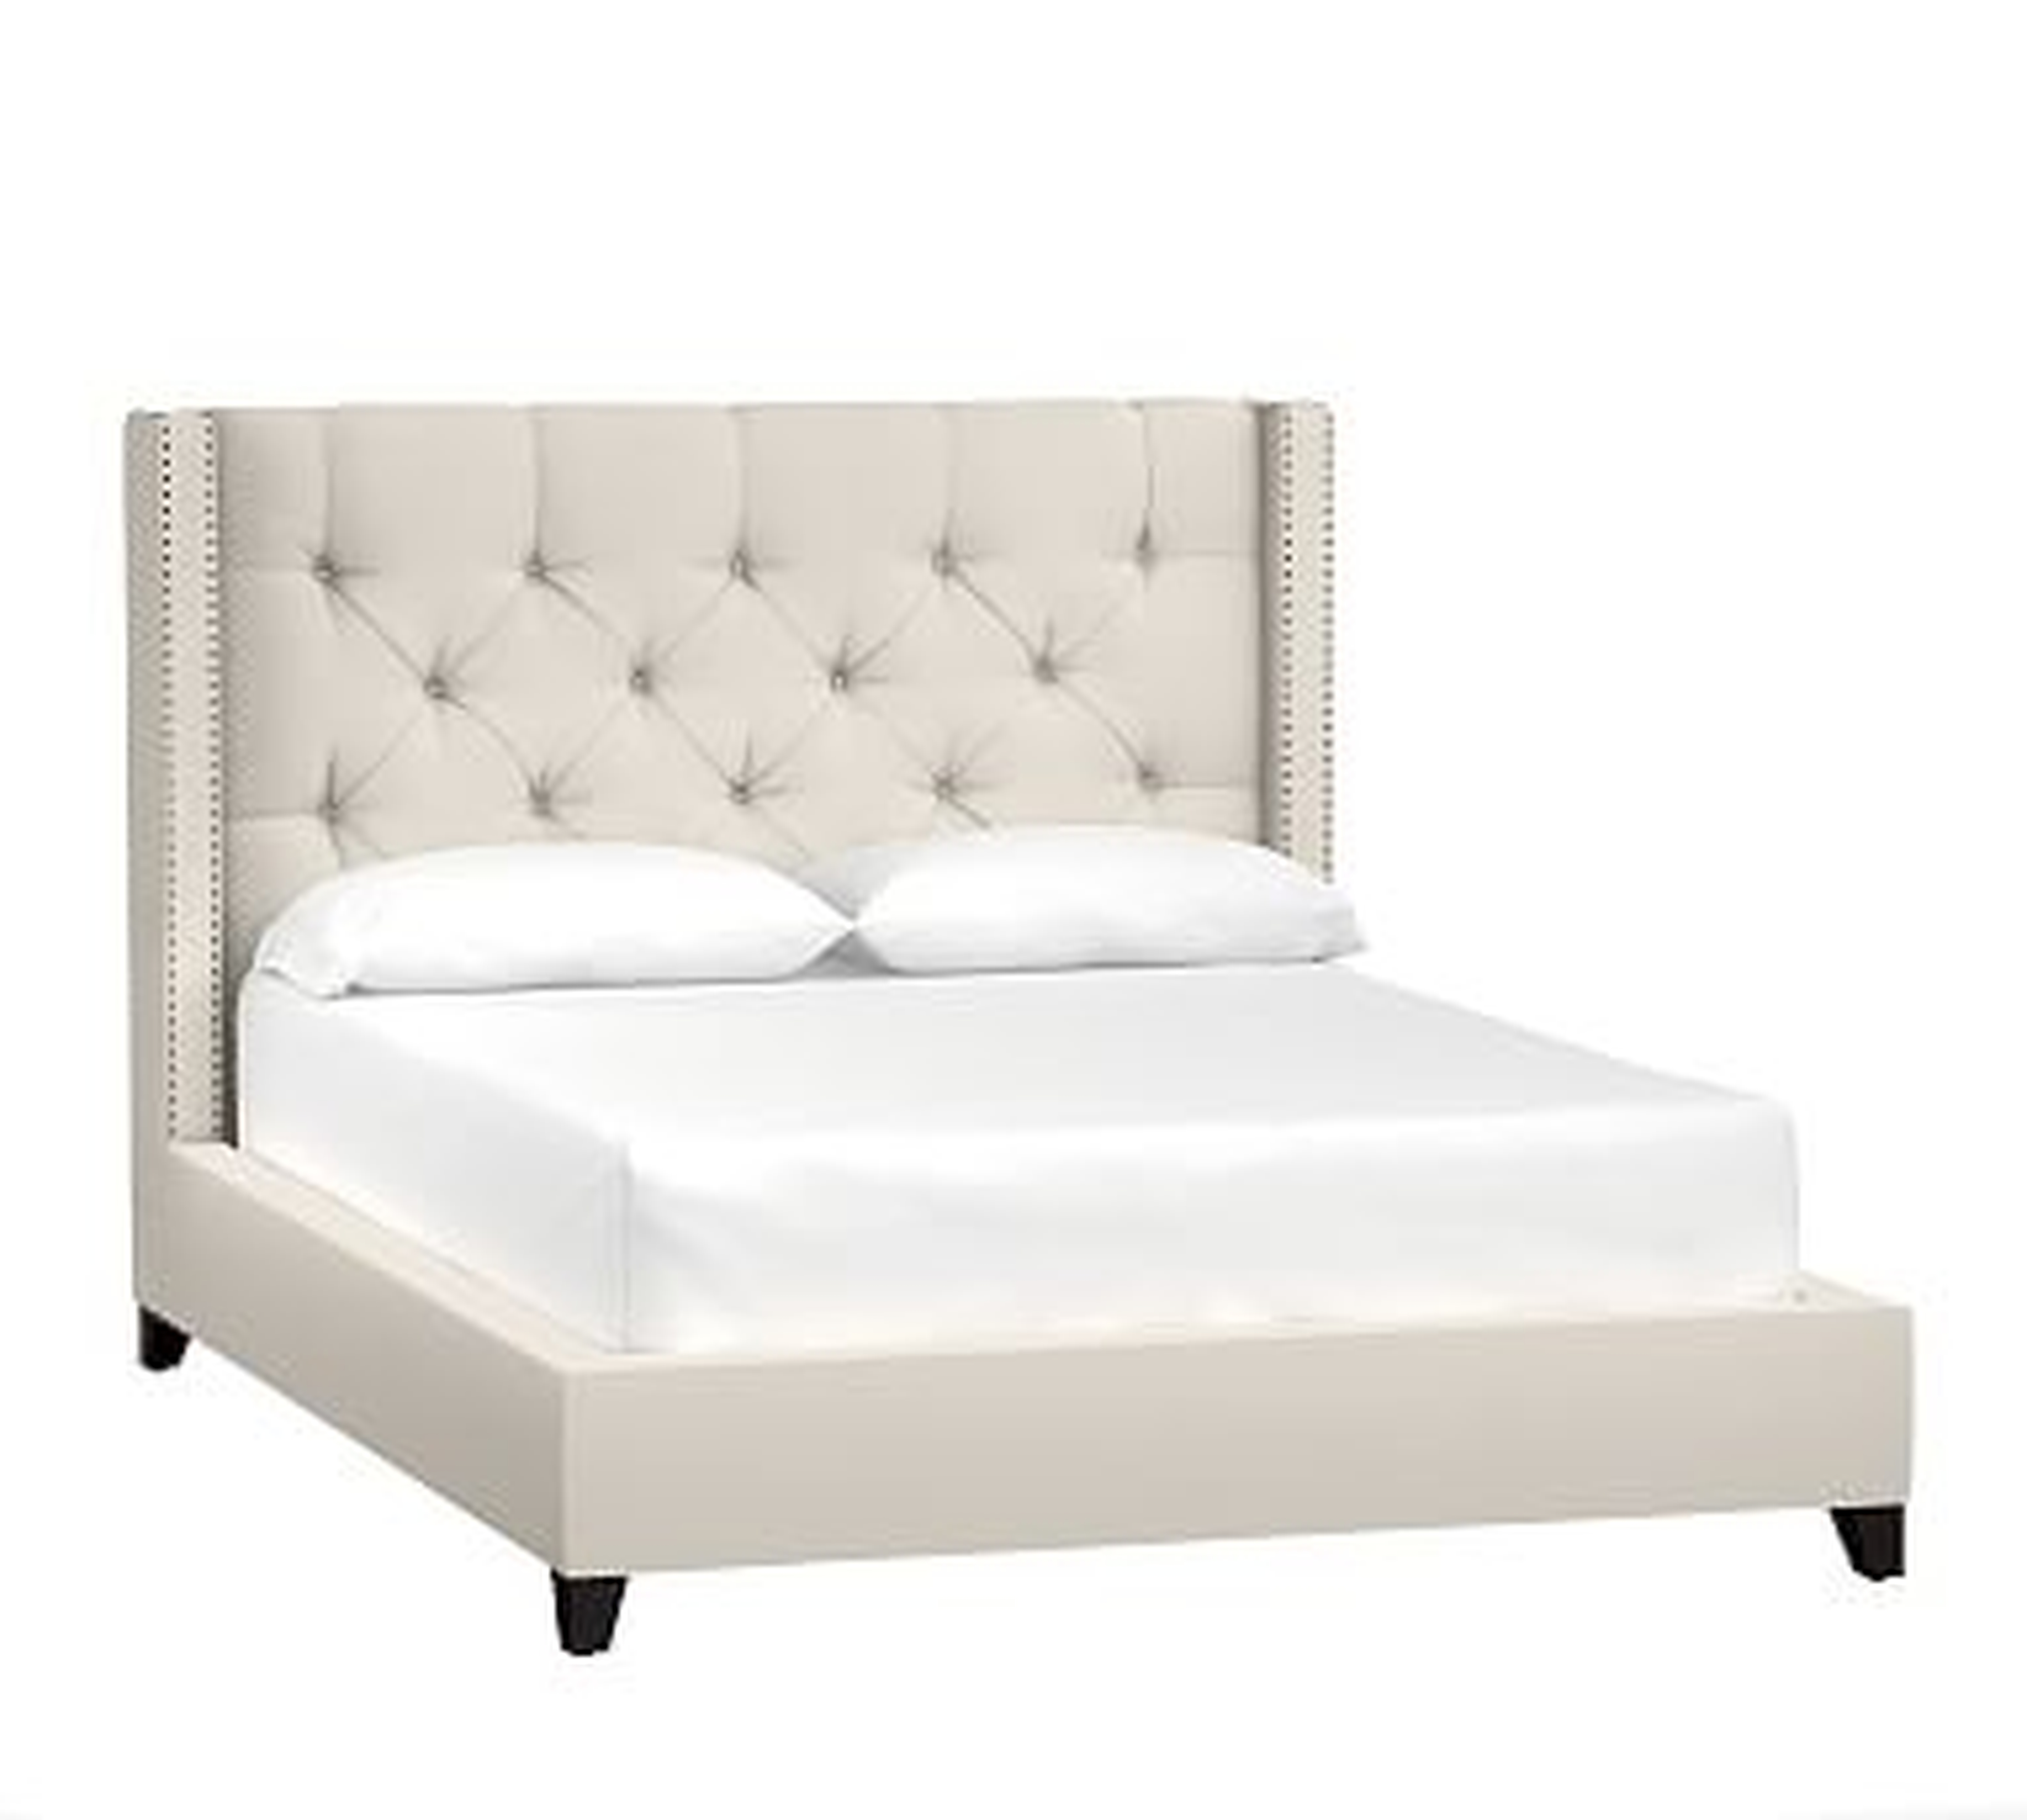 Harper Upholstered Tufted Low Bed with Bronze Nailheads, King, Twill Cream - Pottery Barn